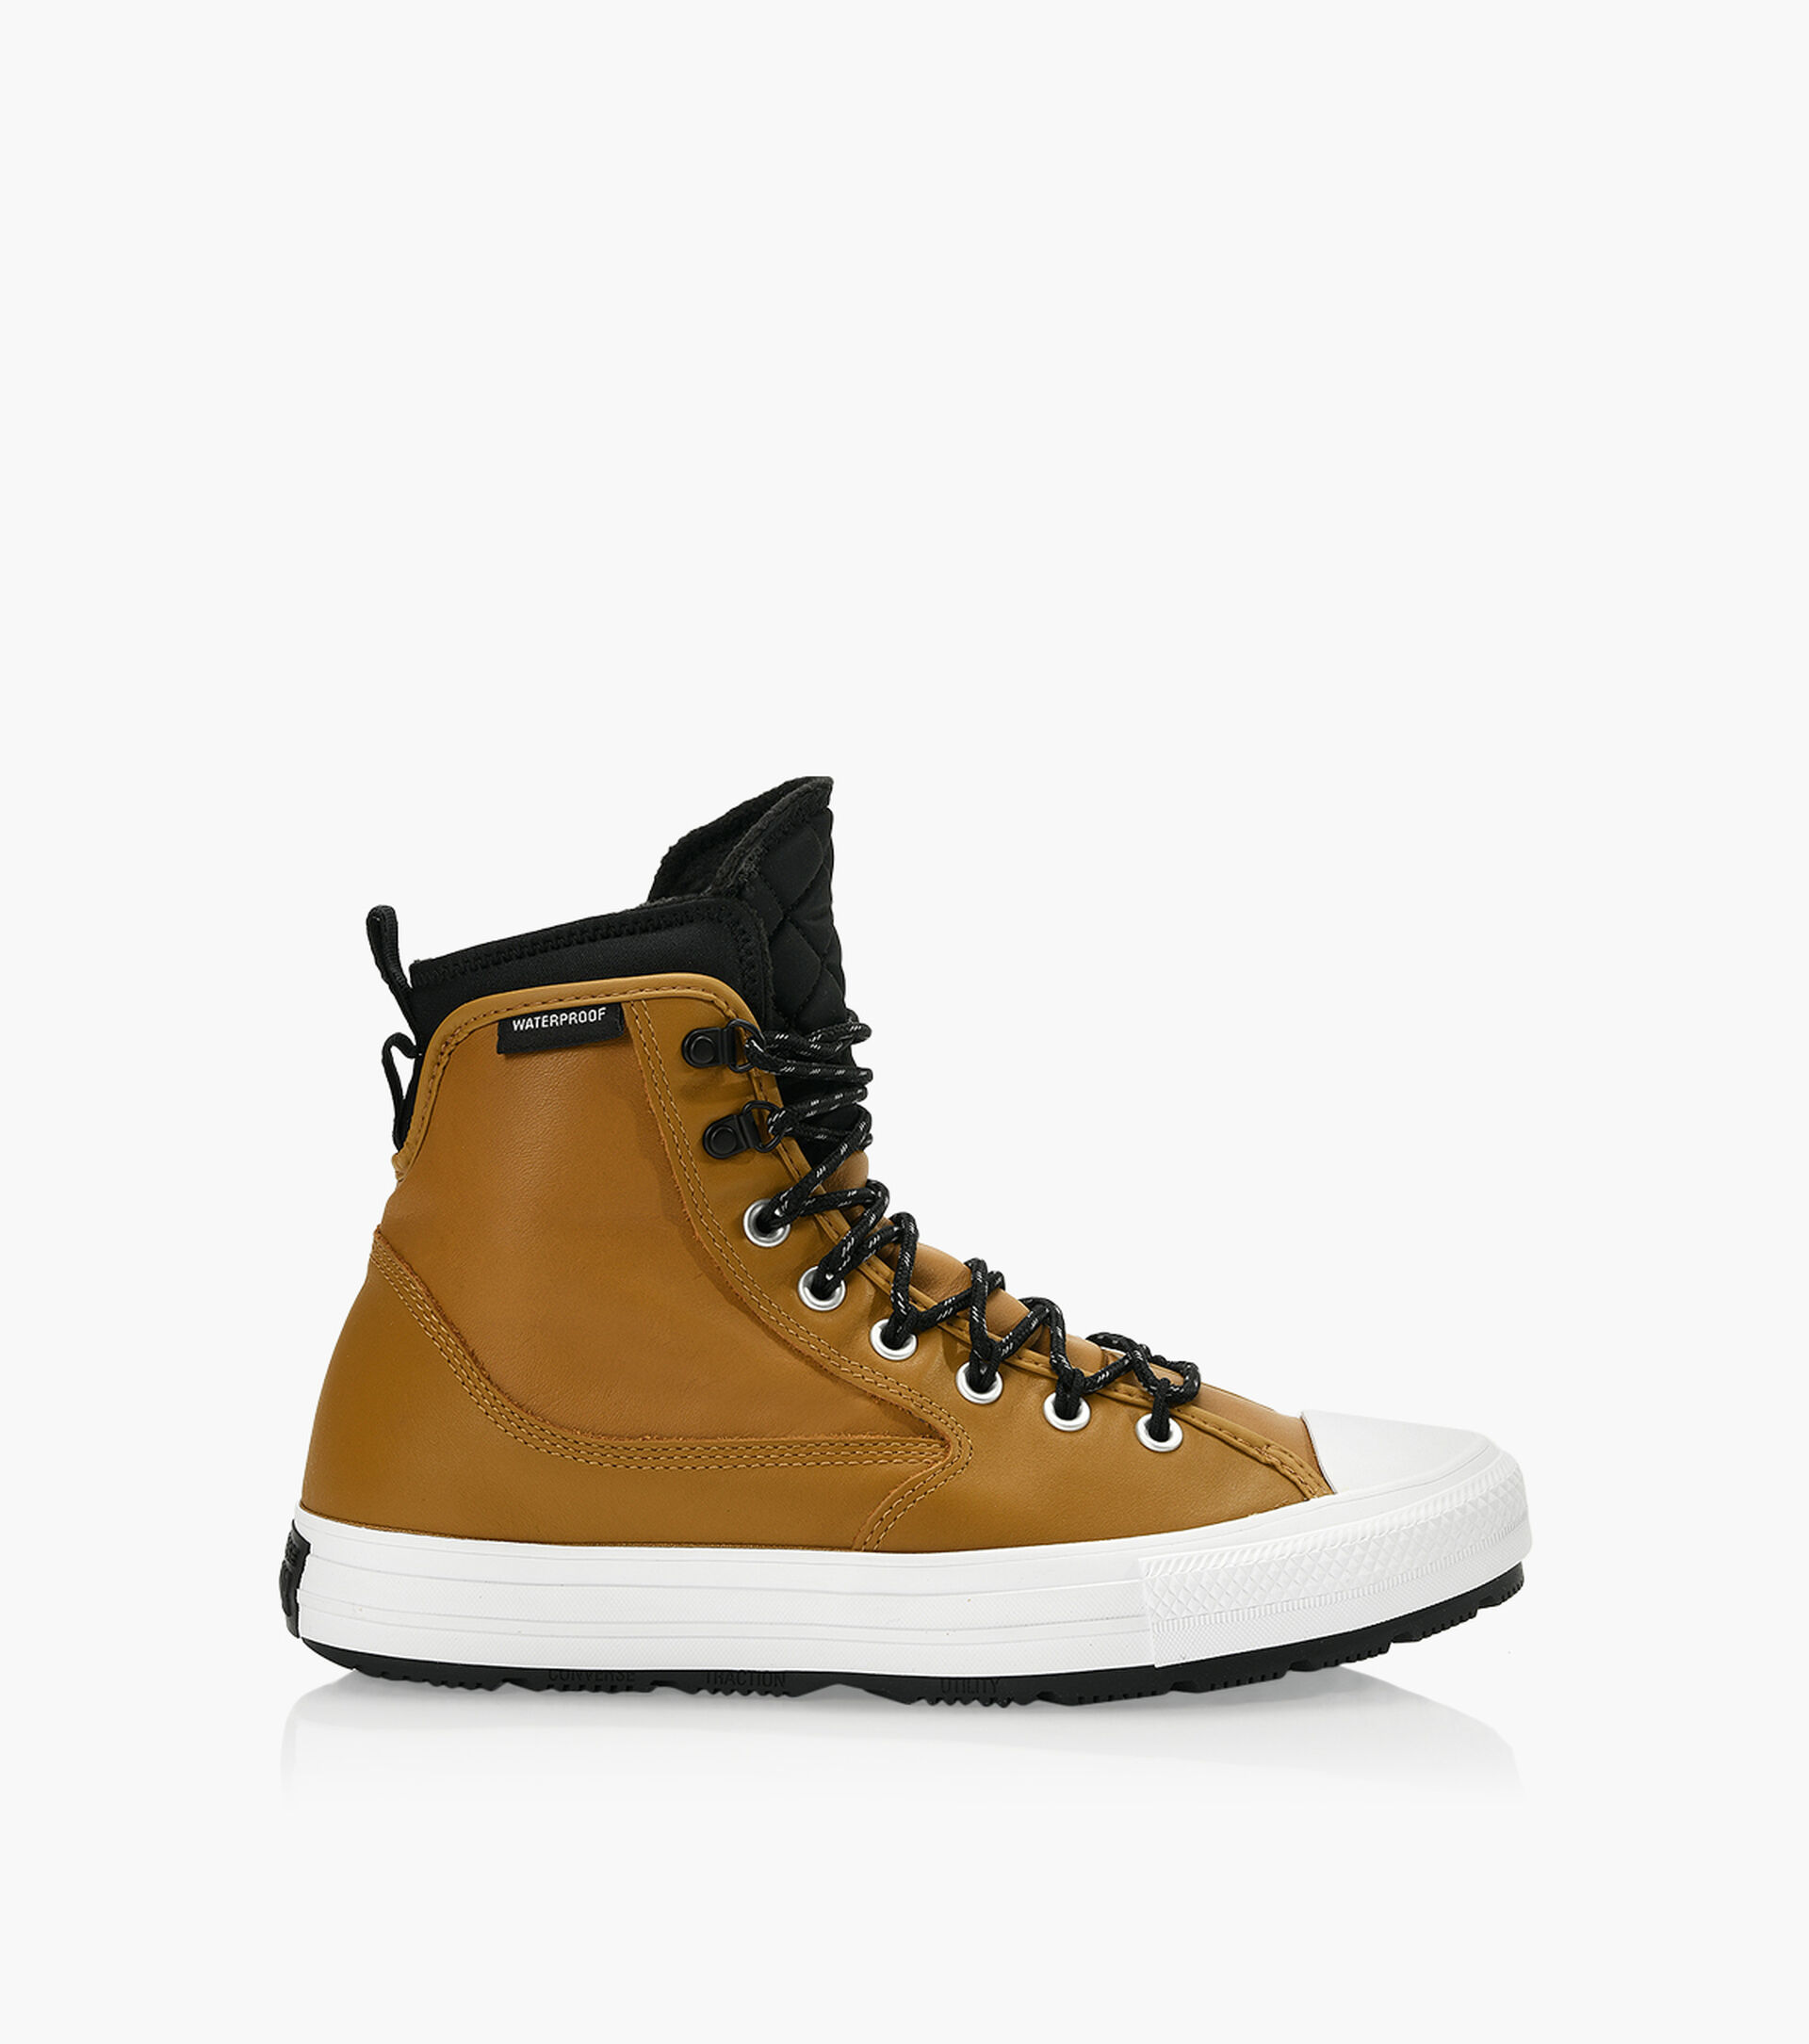 CONVERSE CHUCK TAYLOR ALL STAR UTILITY ALL TERRAIN BOOT | Browns Shoes